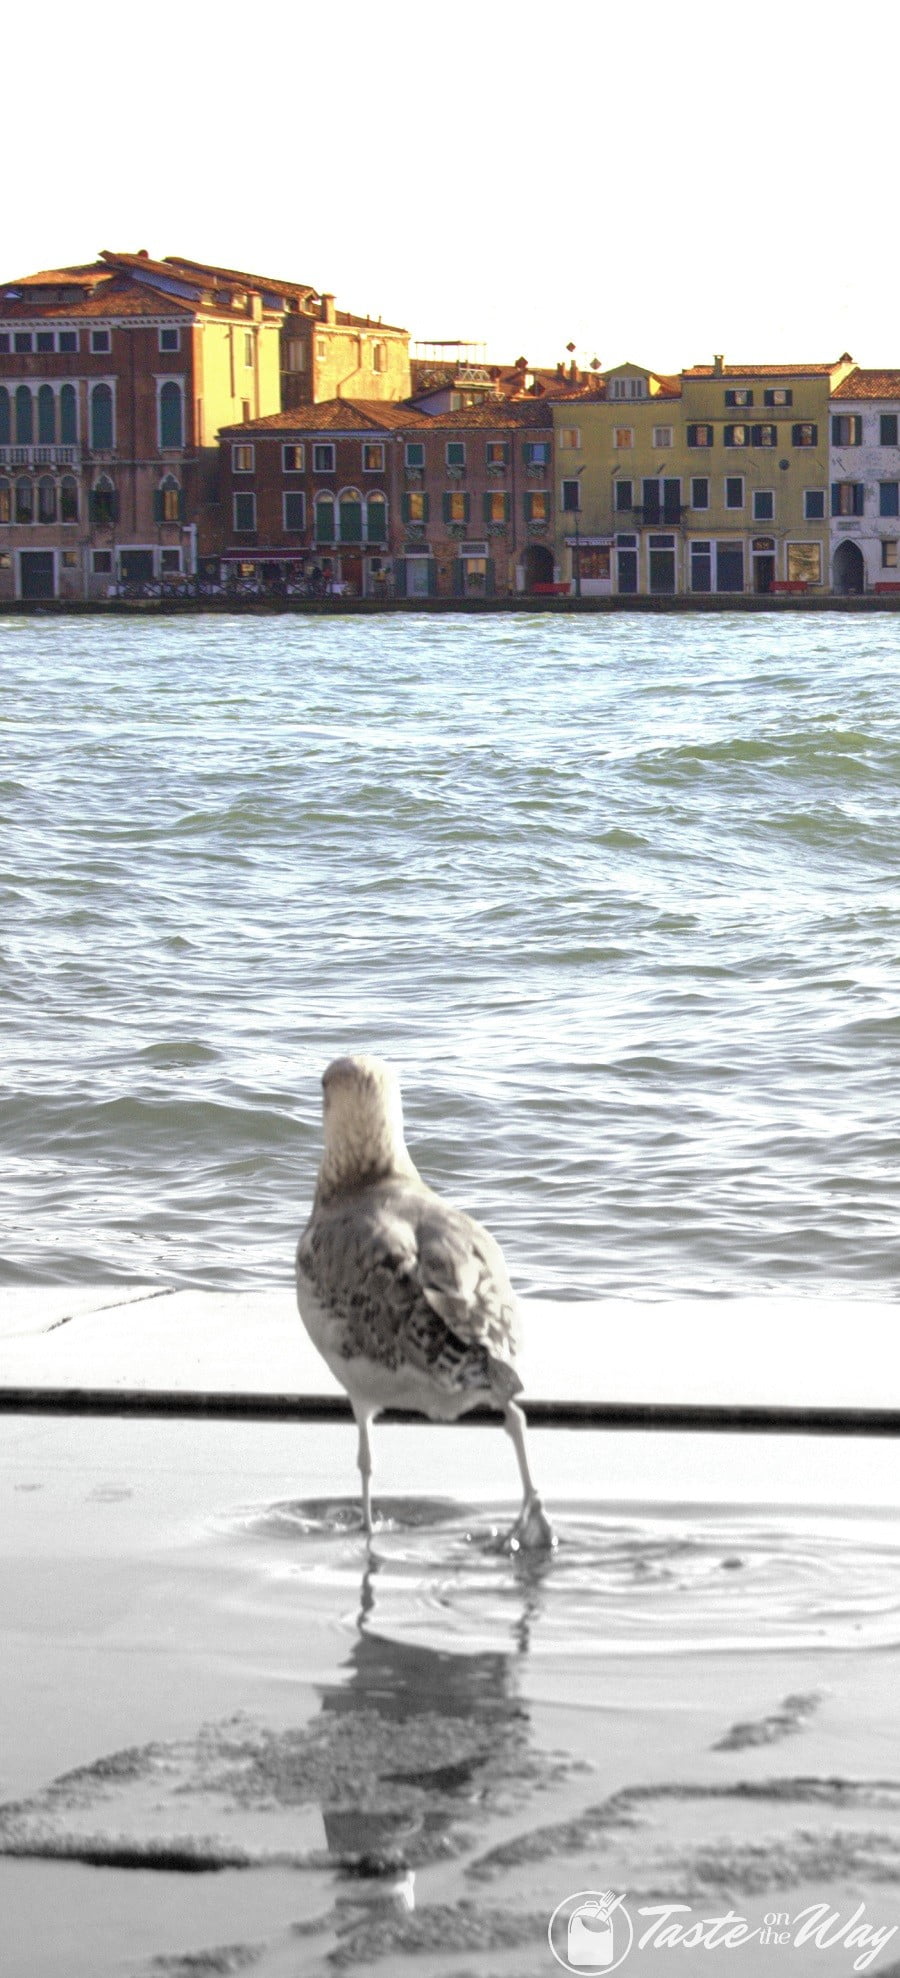 One of the top 10 fun #ThingsToDo in #Venice, #Italy is to observe the local critters. Check out for more! #travel #photography @tasteontheway